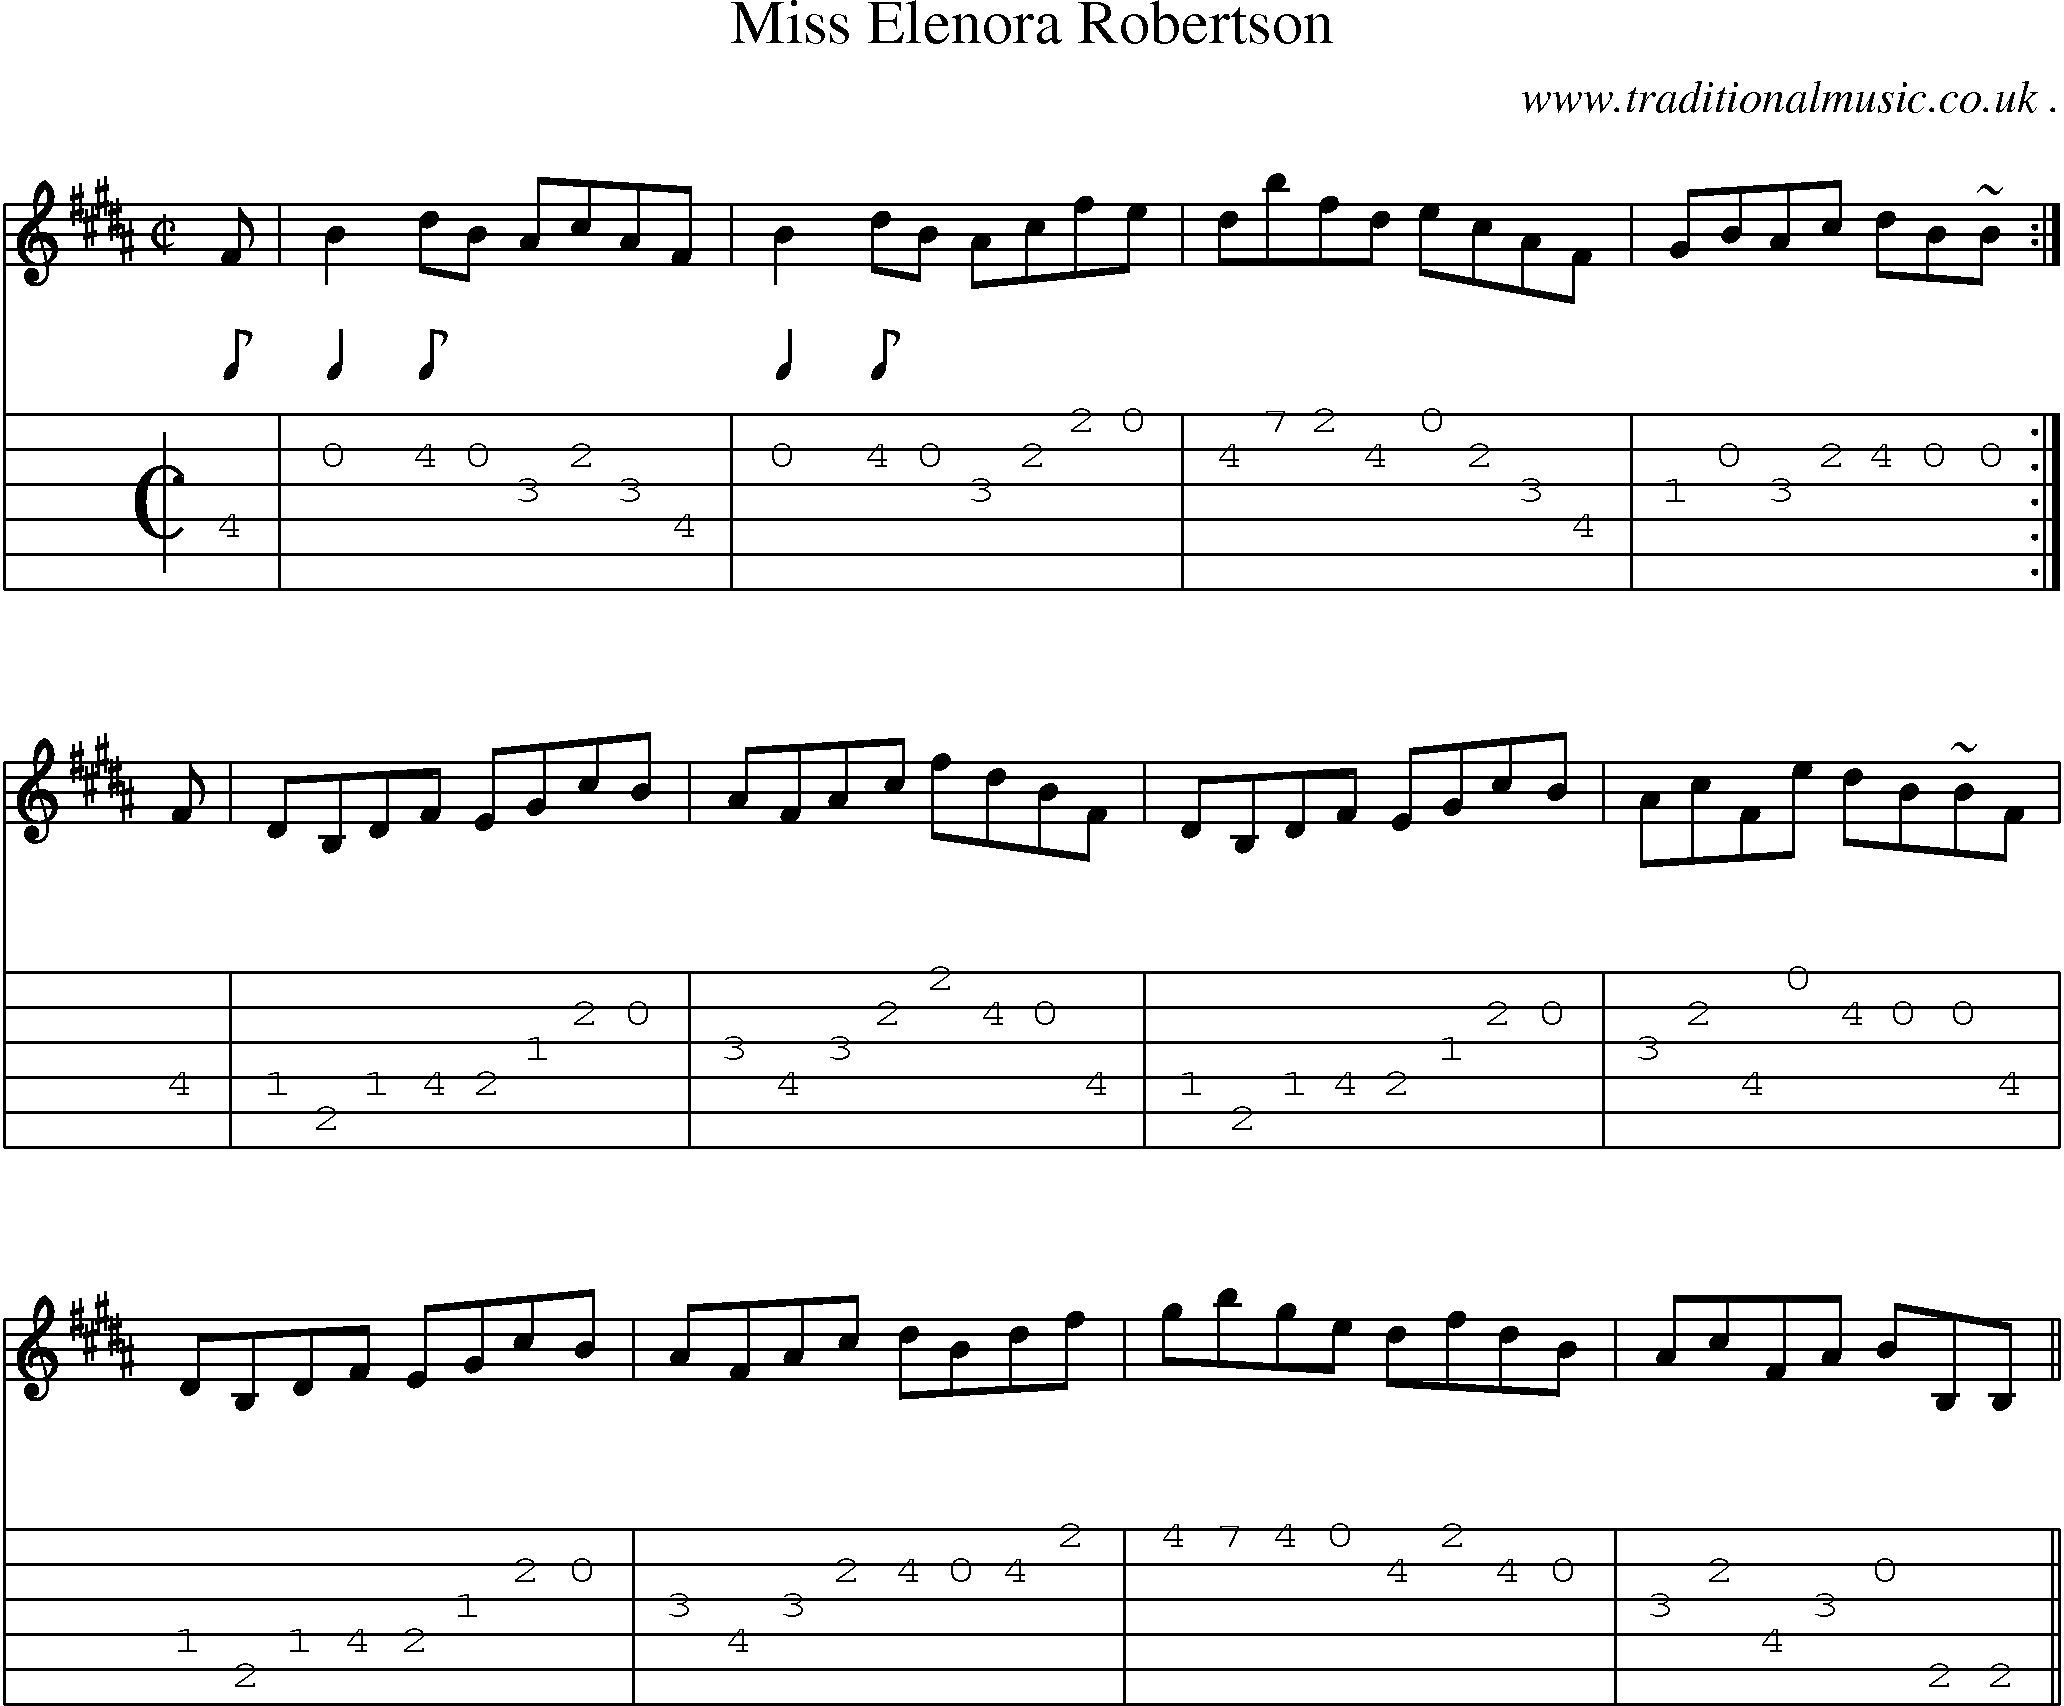 Sheet-music  score, Chords and Guitar Tabs for Miss Elenora Robertson